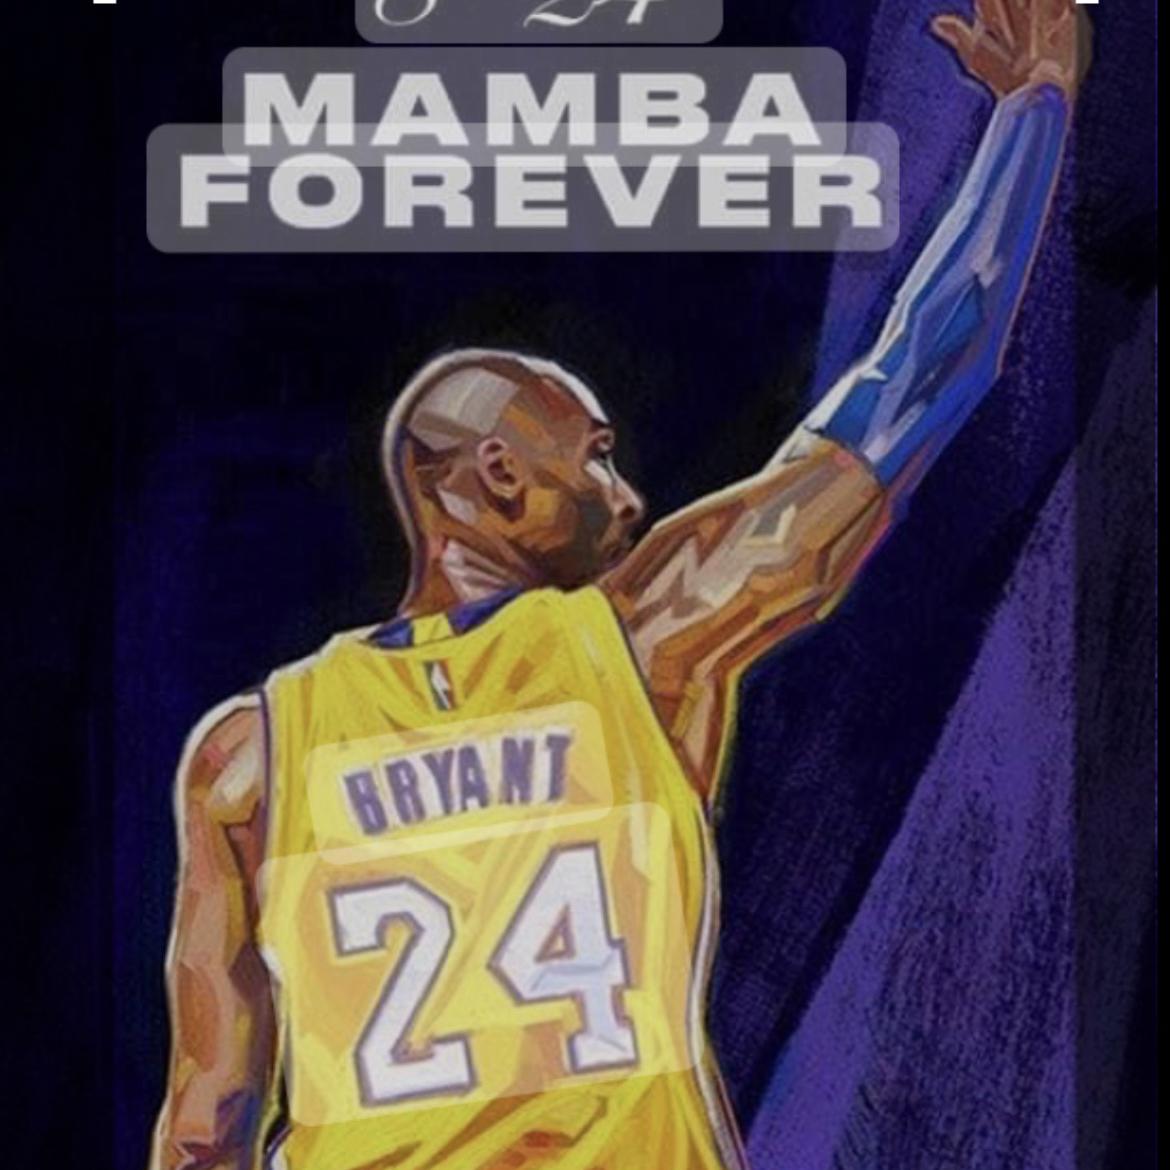 Mamba forever's images